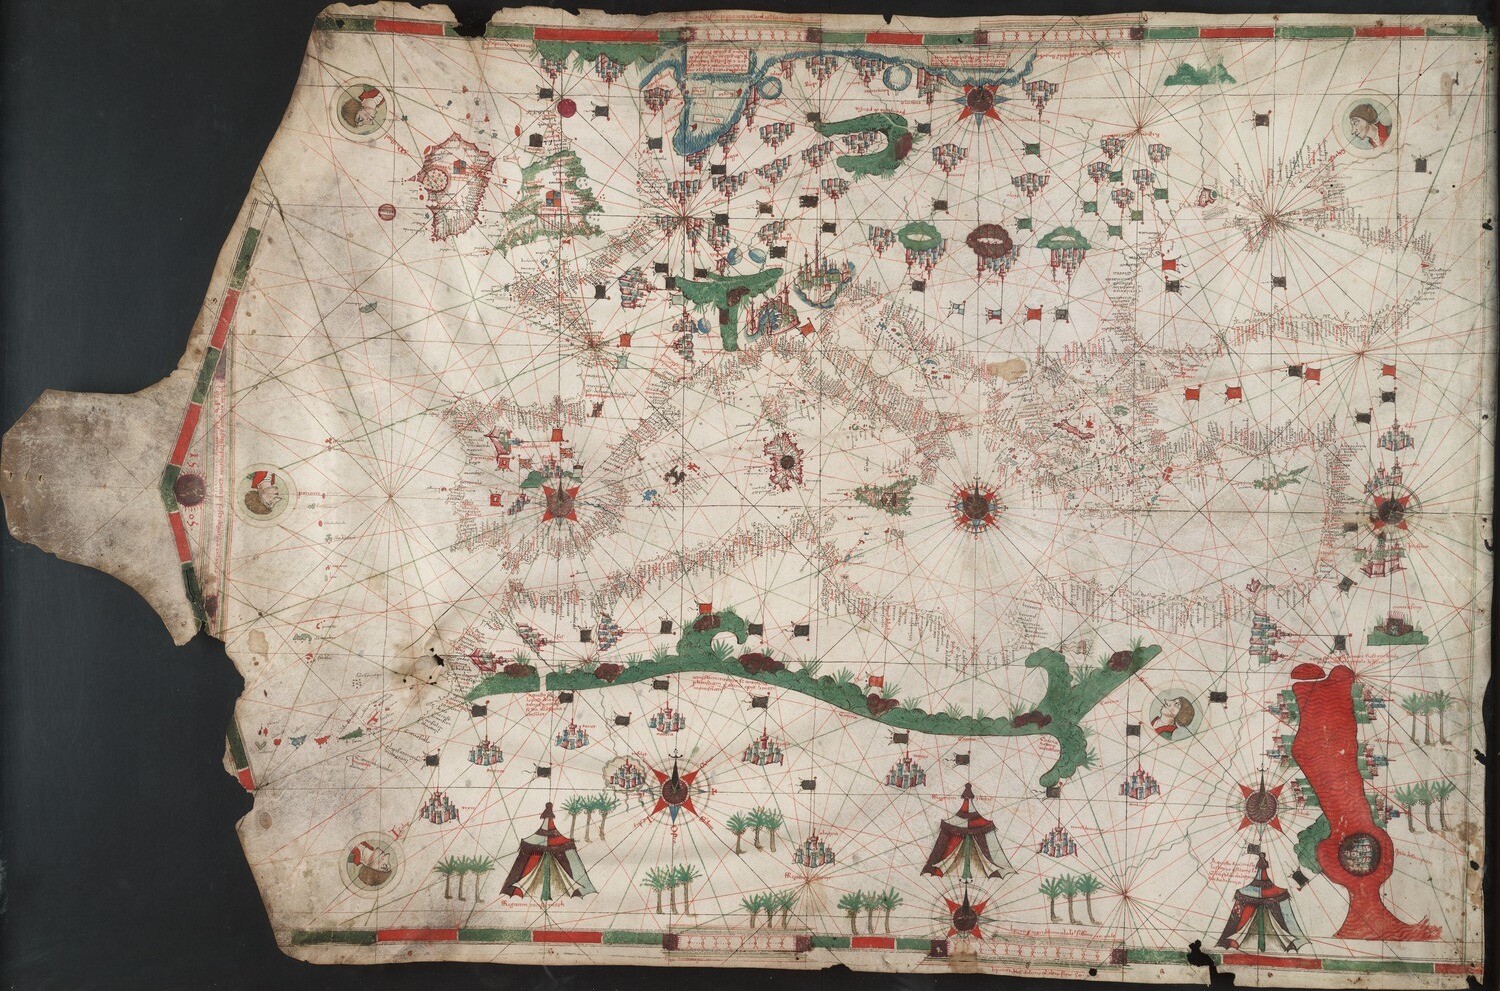 A portolan chart. A large map of lands surrounding the Mediterranean Sea on a single piece of parchment. There are green mountains and the Red Sea is colored red. There are faces blowing winds from sixteen directions toward the center of the map.